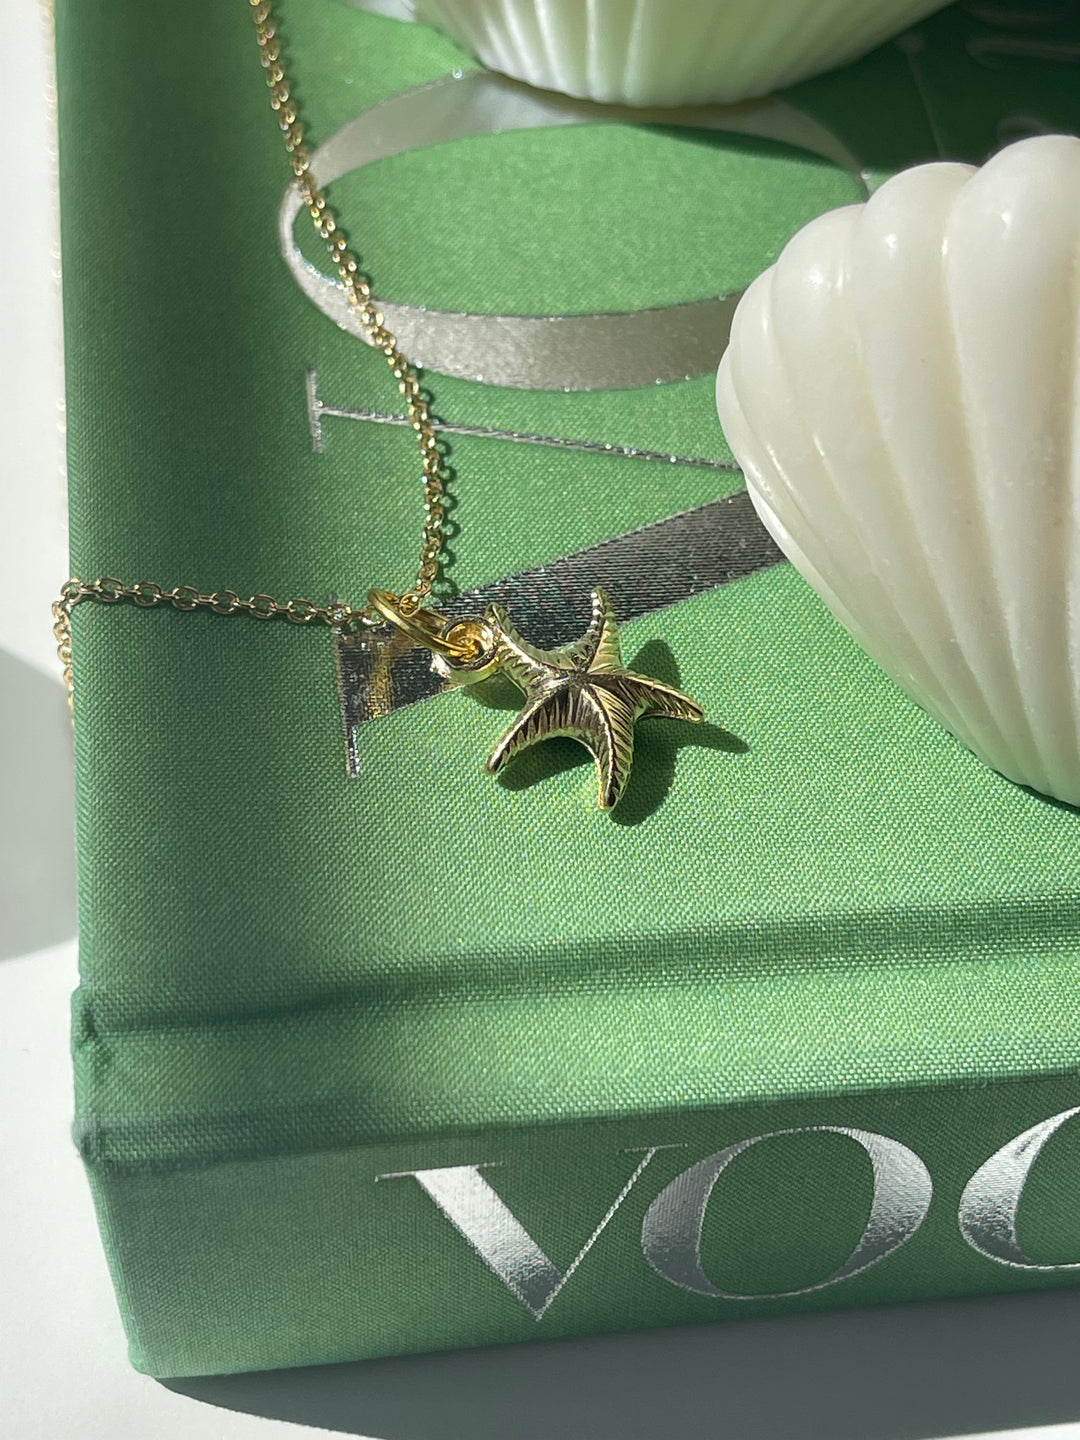 The Starfish necklace